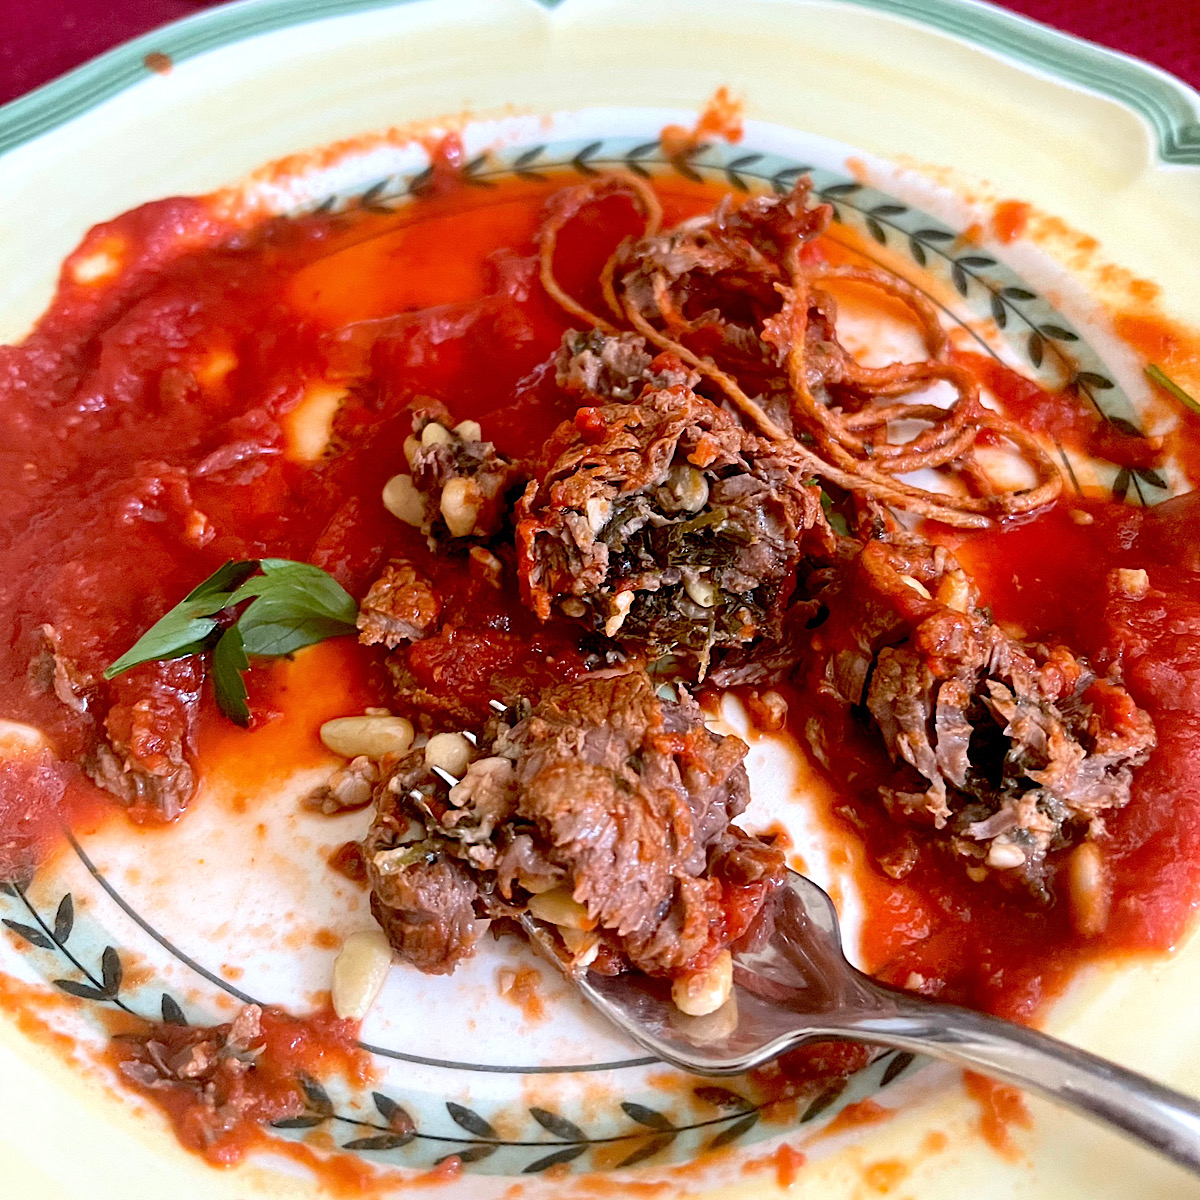 Italian braciole with tomato sauce and a slice of it on a fork.